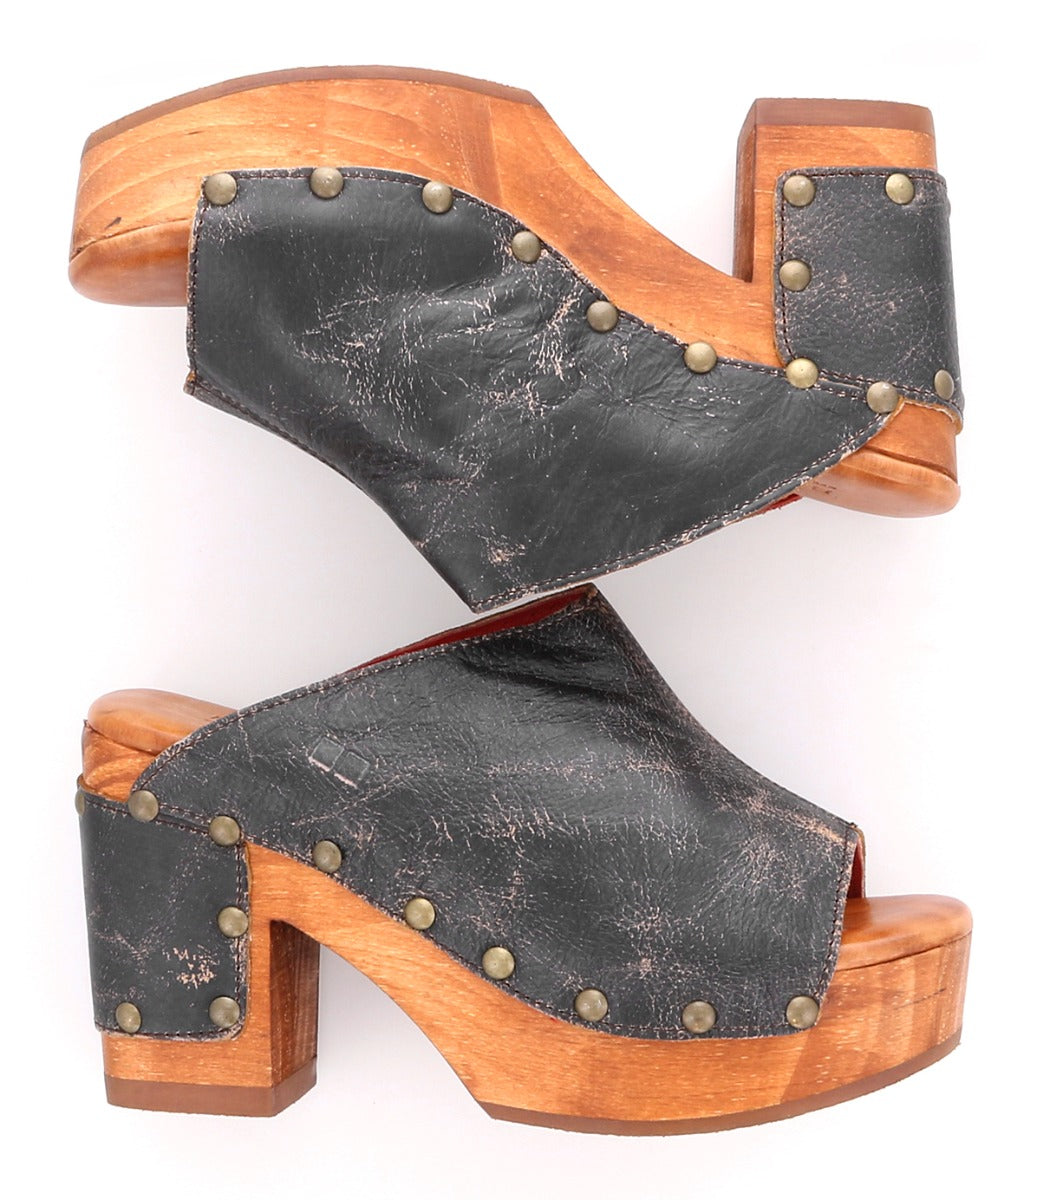 A pair of black leather Deva clogs with wooden heels by Bed Stu.